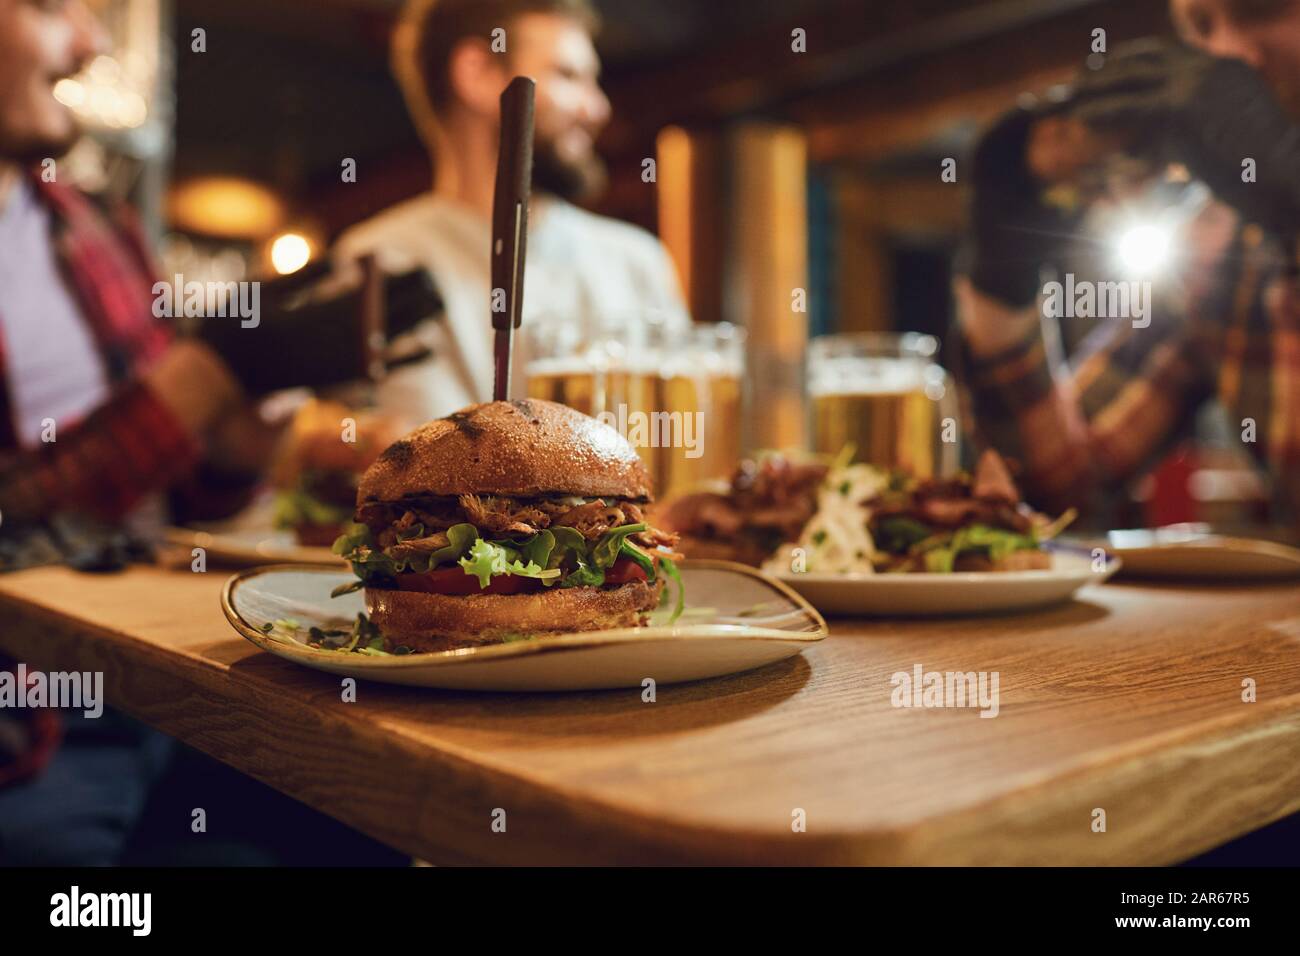 Burger with beer on the table in a bar pub. Stock Photo